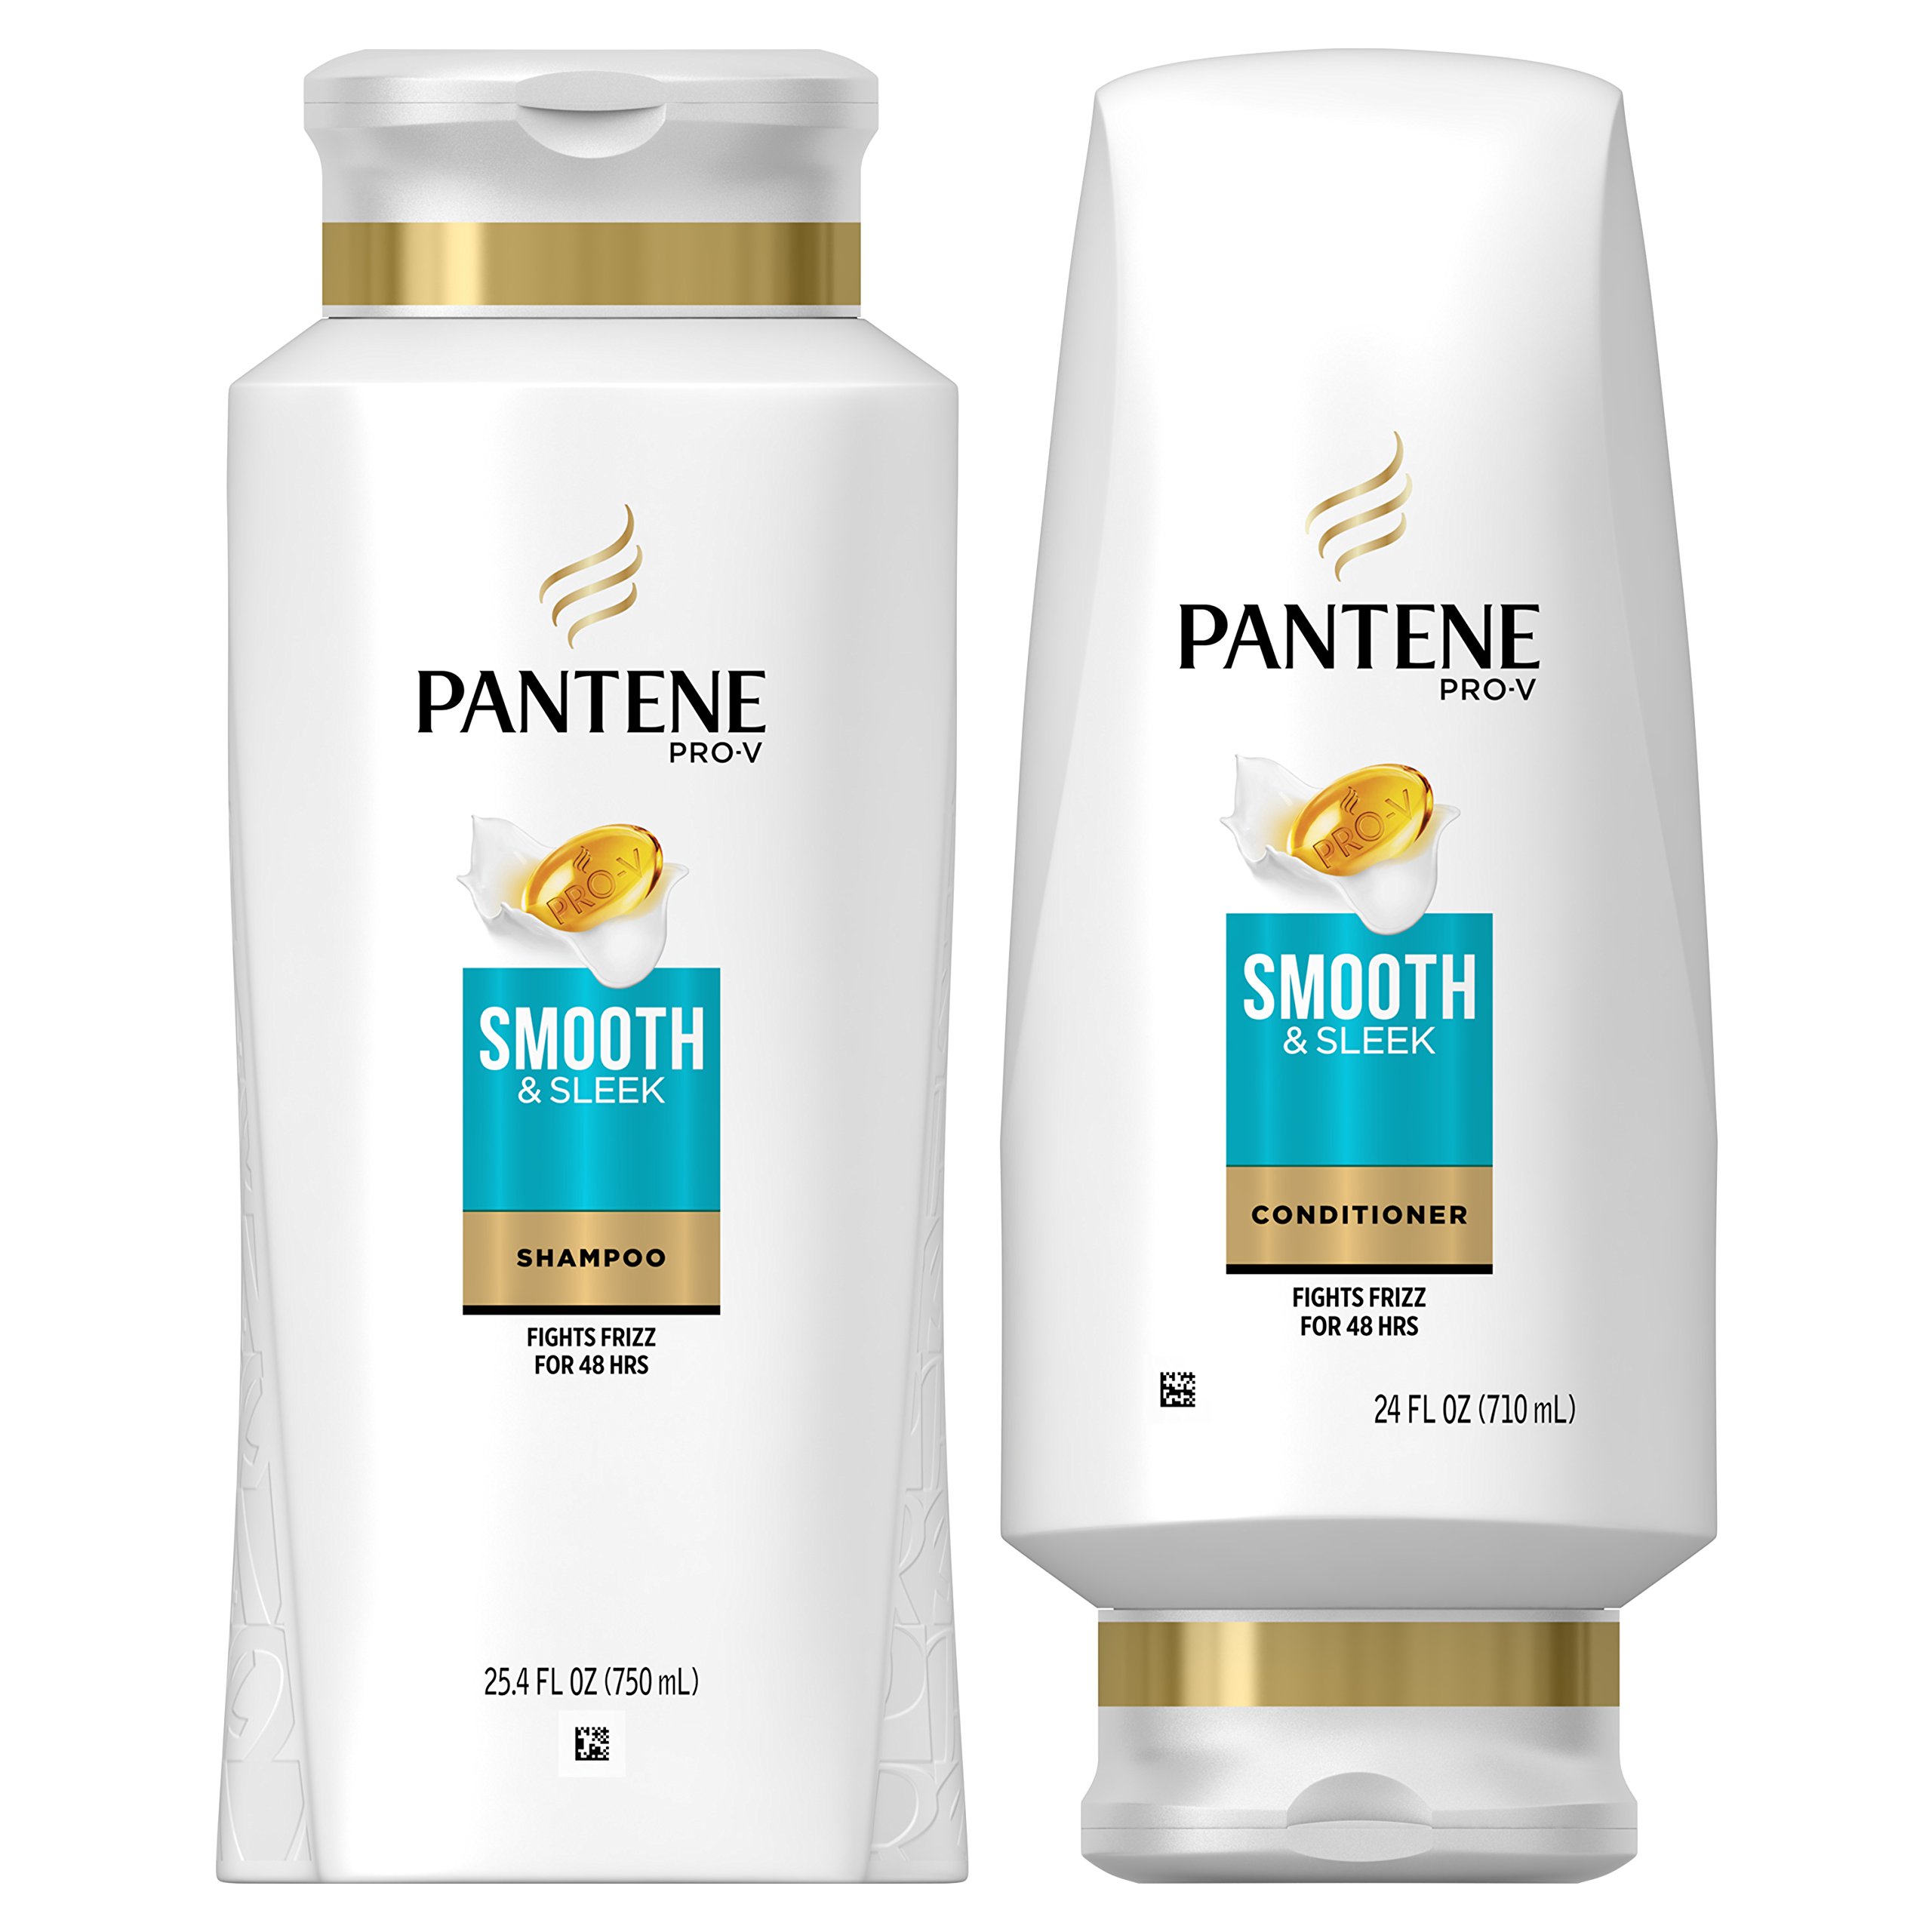 Pantene Argan Oil Shampoo 25.4 OZ and Conditioner 24 OZ for Dry Hair, Smooth and Sleek, Bundle Pack (Packaging May Vary)